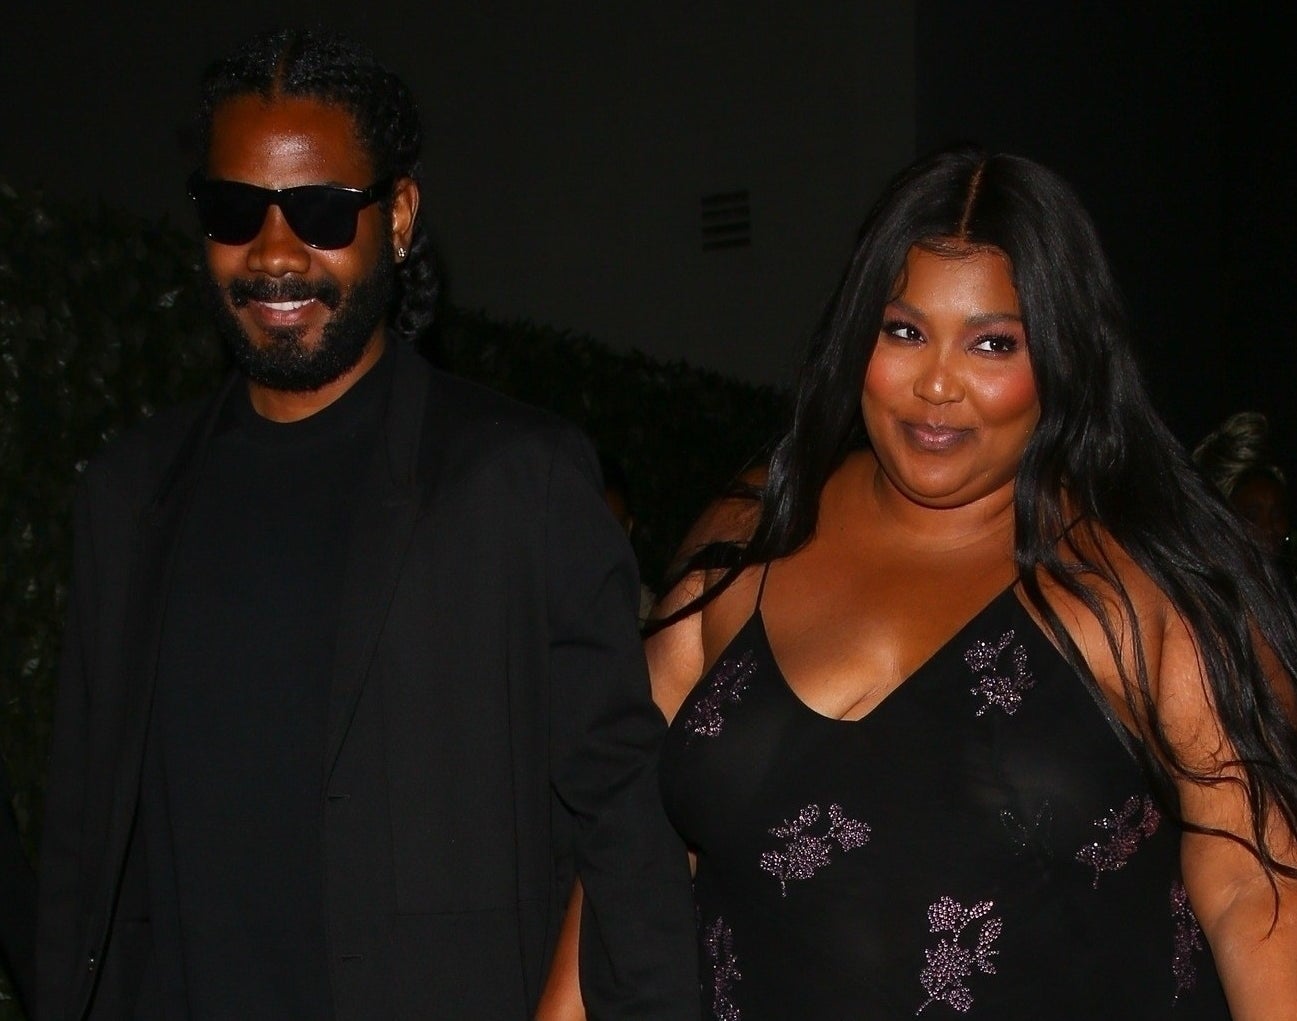 Lizzo smiles while standing close to a man in a black blazer and sunglasses